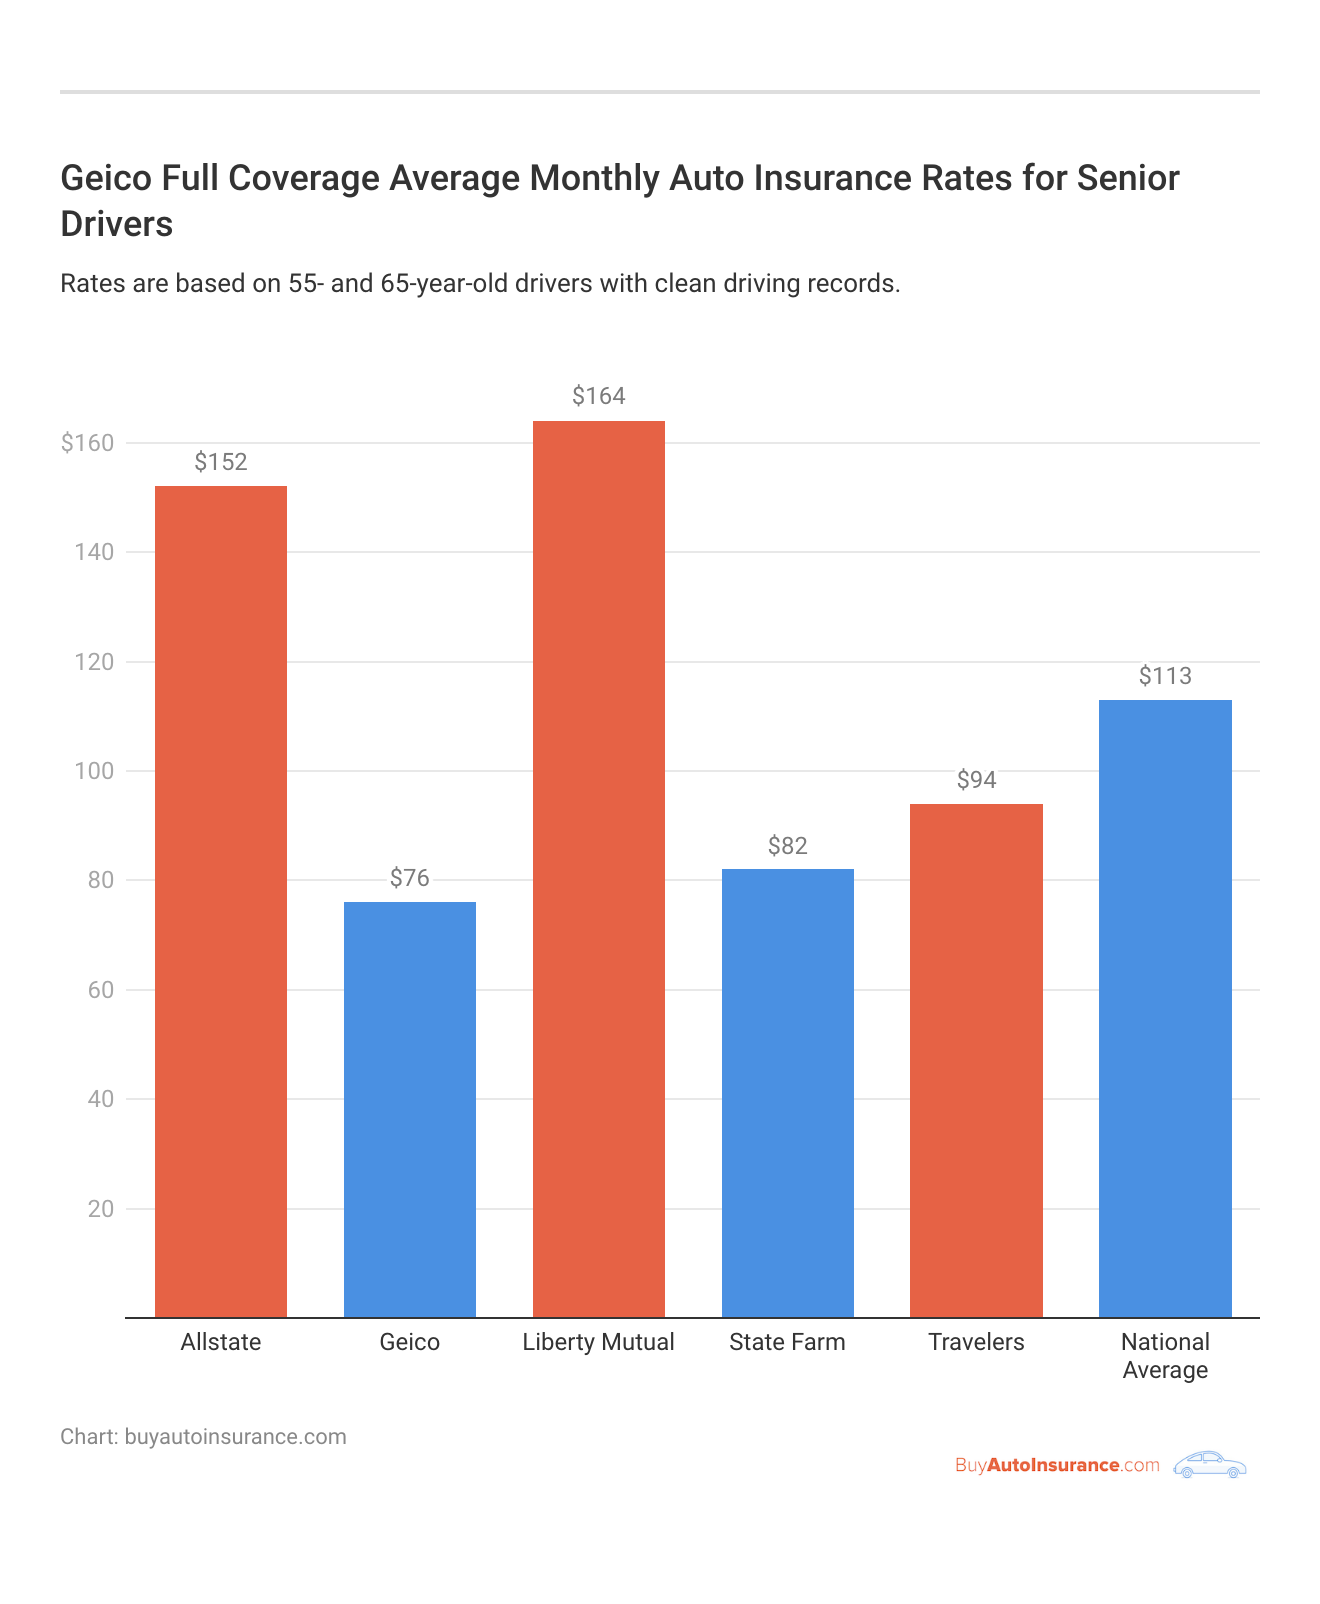 <h3>Geico Full Coverage Average Monthly Auto Insurance Rates for Senior Drivers</h3>